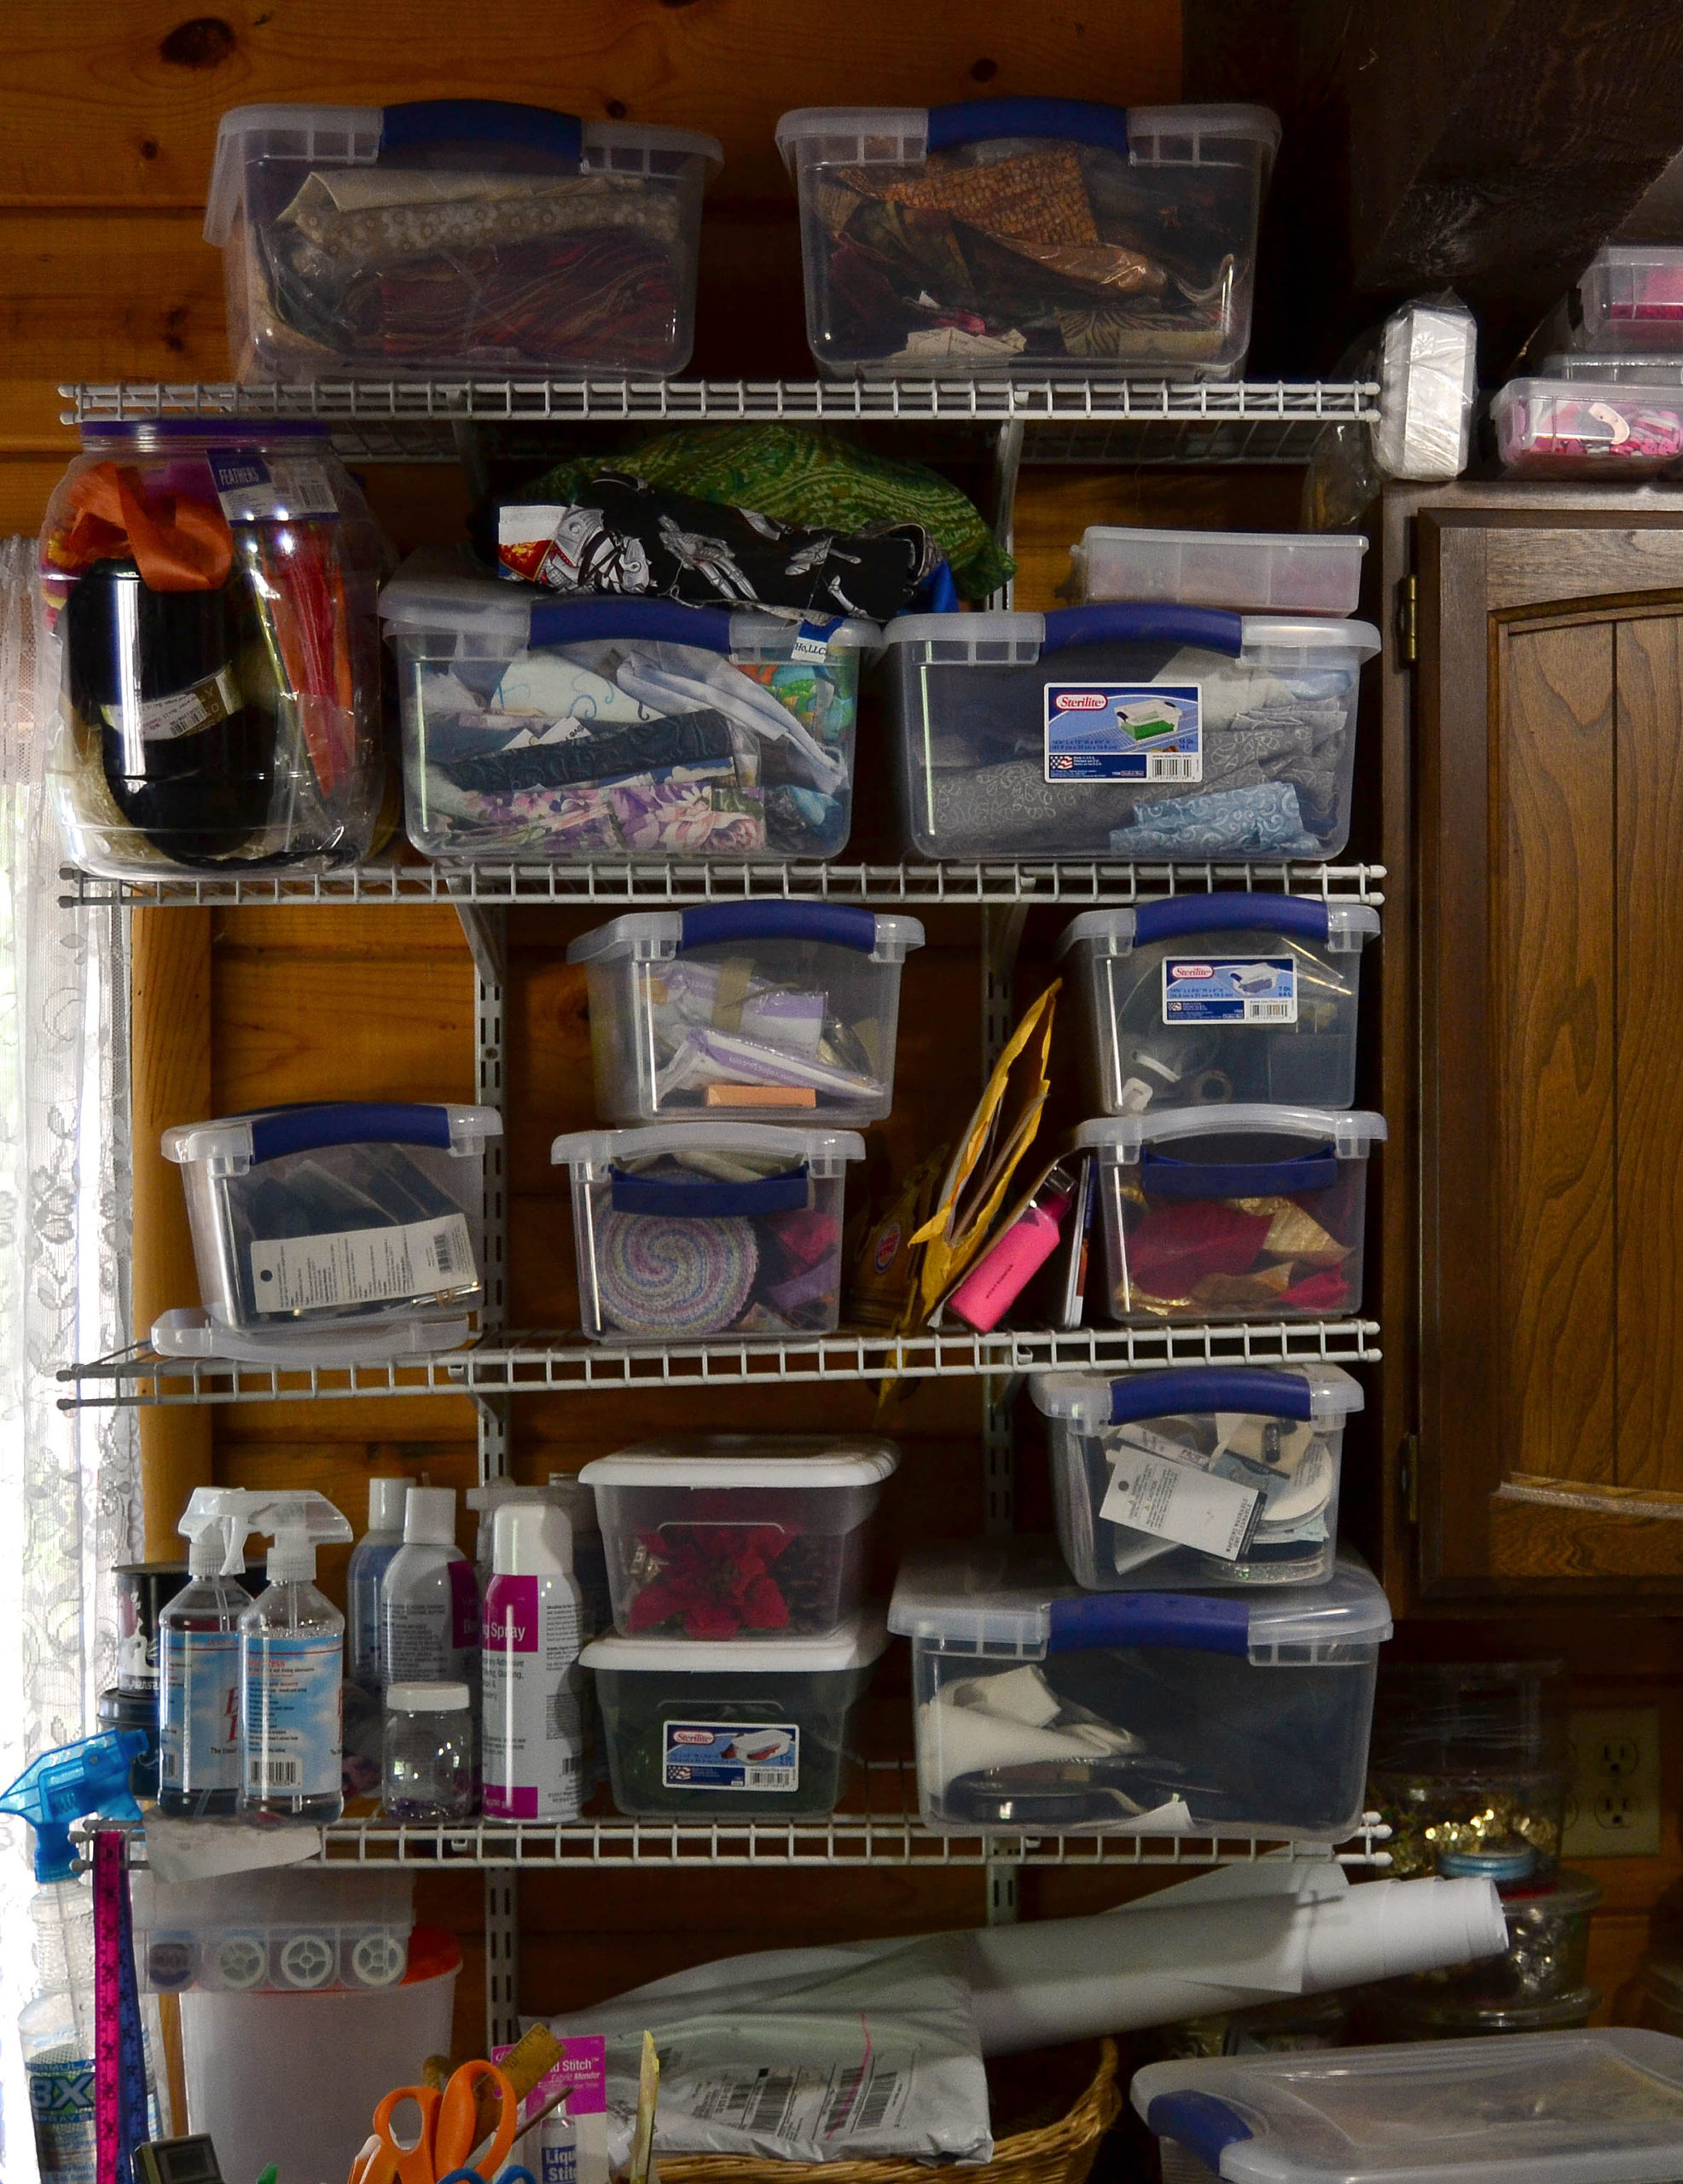 Wire shelves to hold sewing supplies, all the clutter corralled in tubs